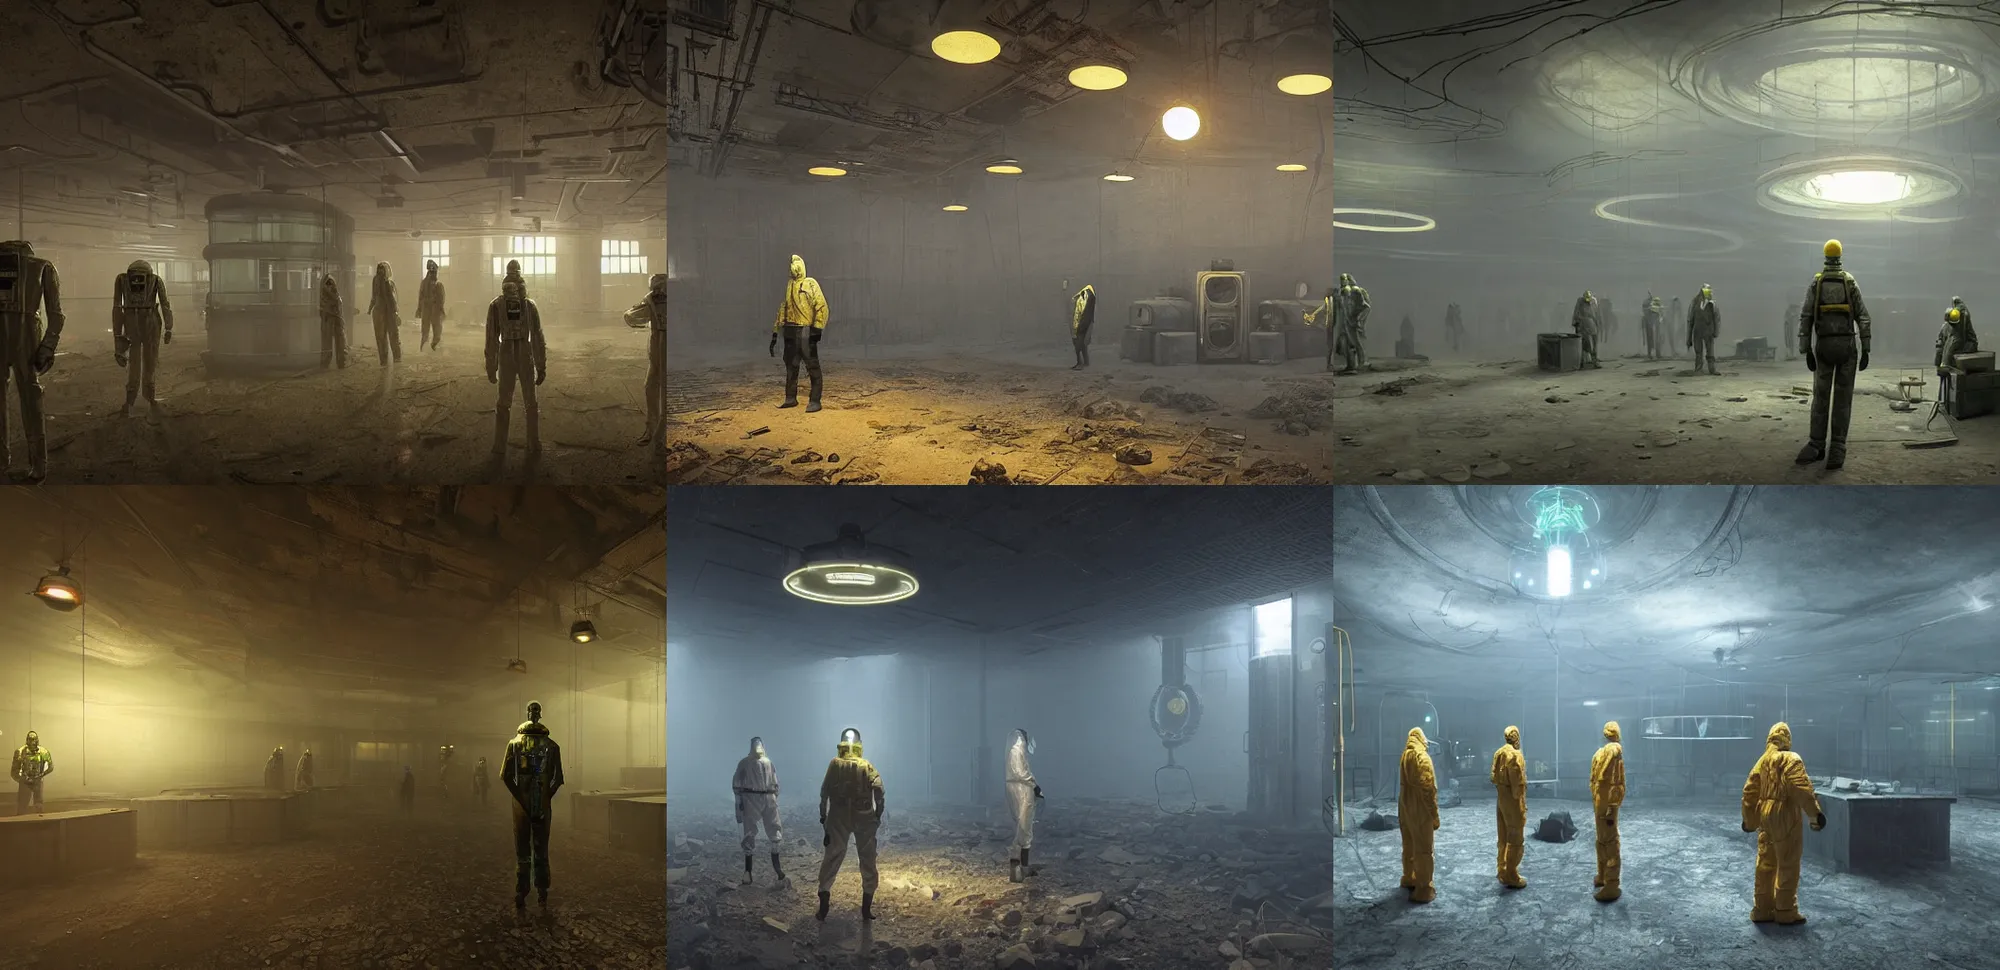 Prompt: rustic yet enormous SCP (Secure, Contain, Protect) agency interior with bioluminescent office workers in hazmat suits and giant iridescent alien artifacts suspended in cylindrical containers made of gold and quartz by Simon Stalenhag, inspired by Metro 2033 and Silent Hill 4 and Stalker Shadow of Chernobyl and Control the game